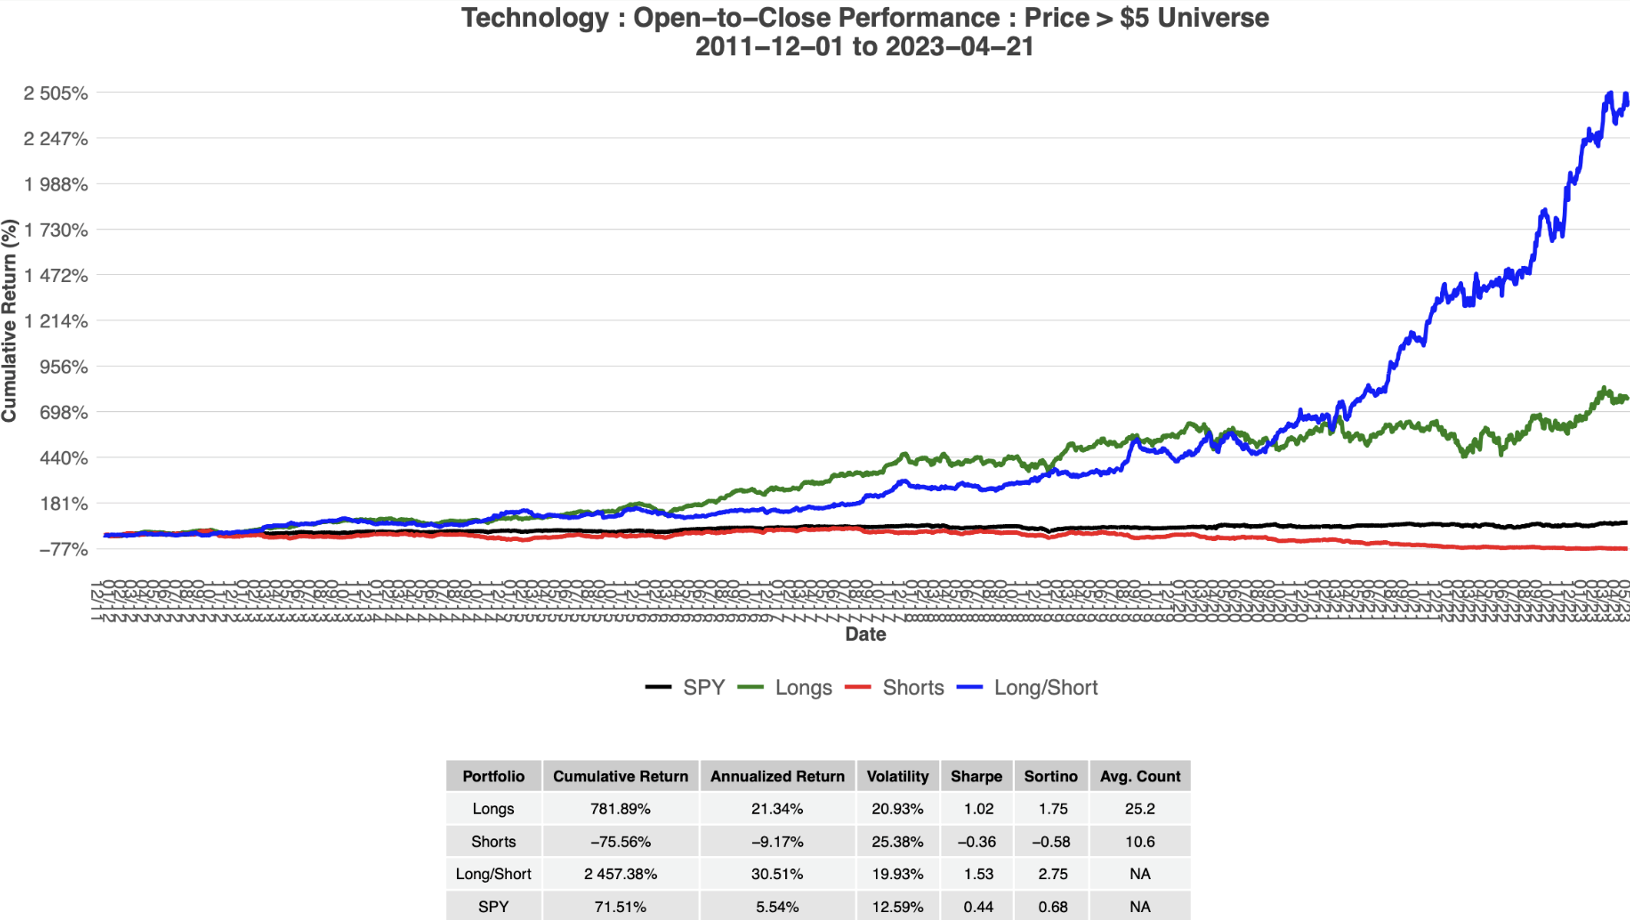 Technology: Open-to-Close Performance : Price> $5 Universe